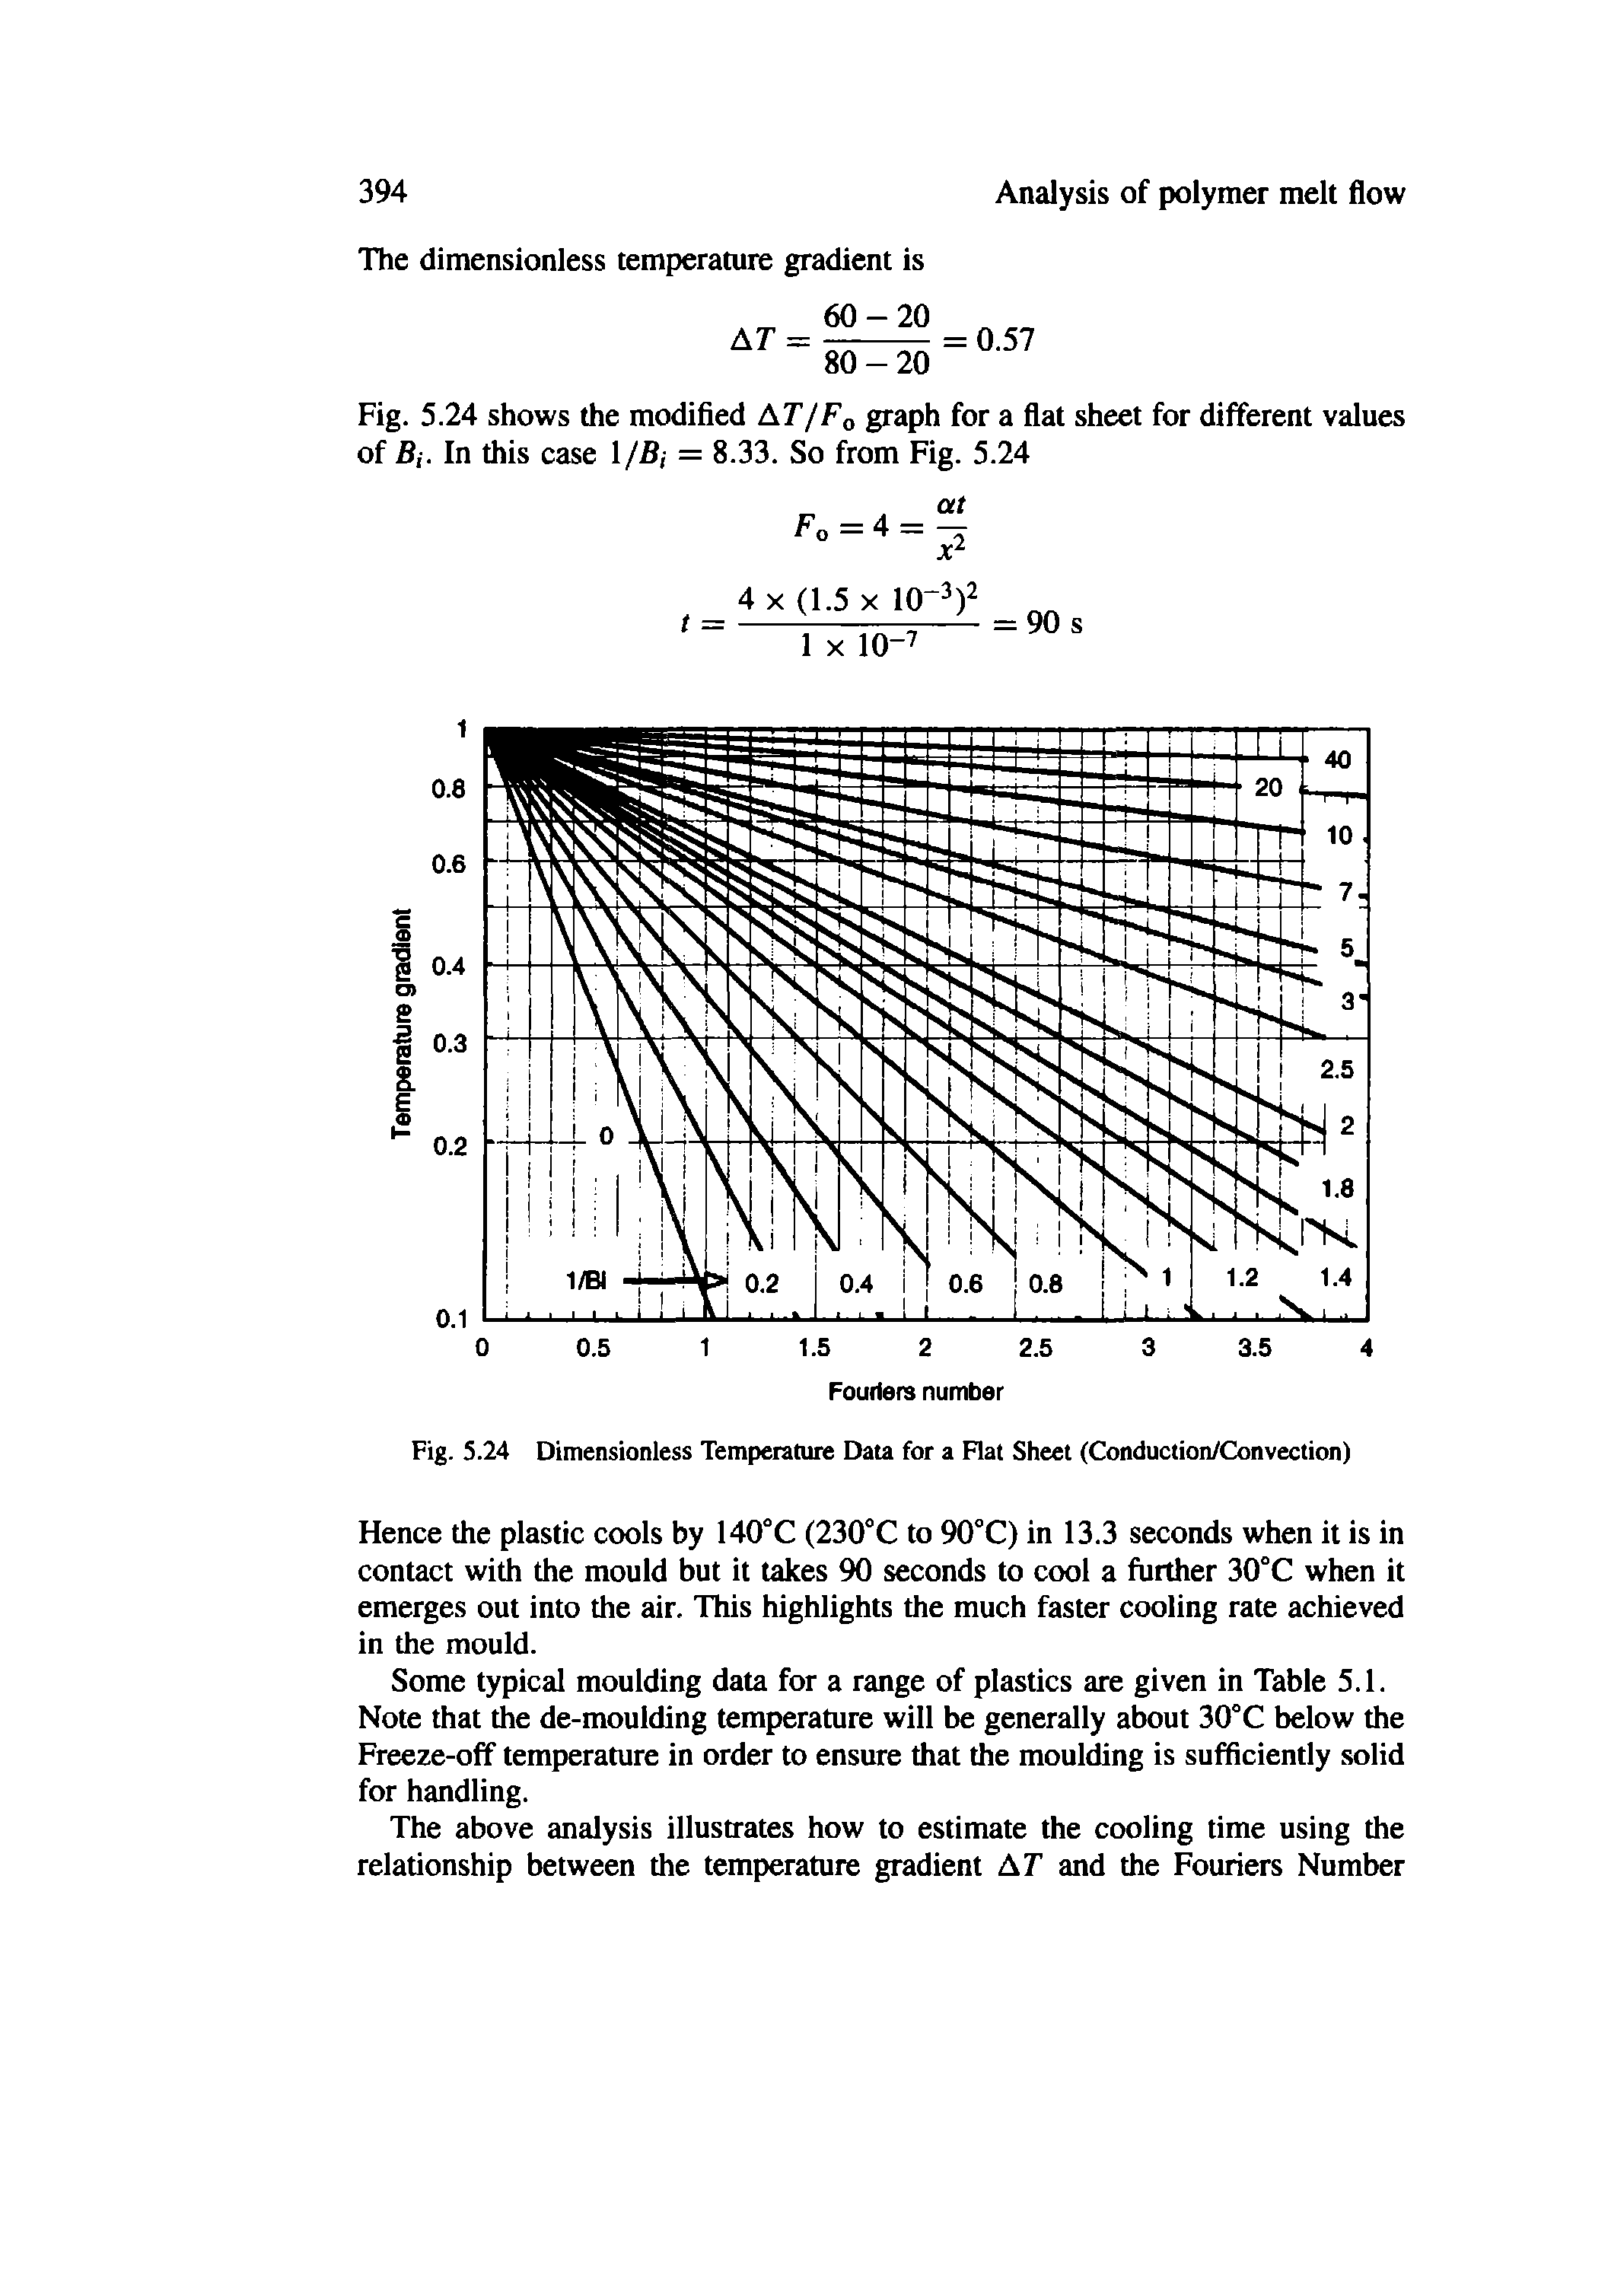 Fig. S.24 Dimensionless Temperature Data for a Flat Sheet (Conduction/Convection)...